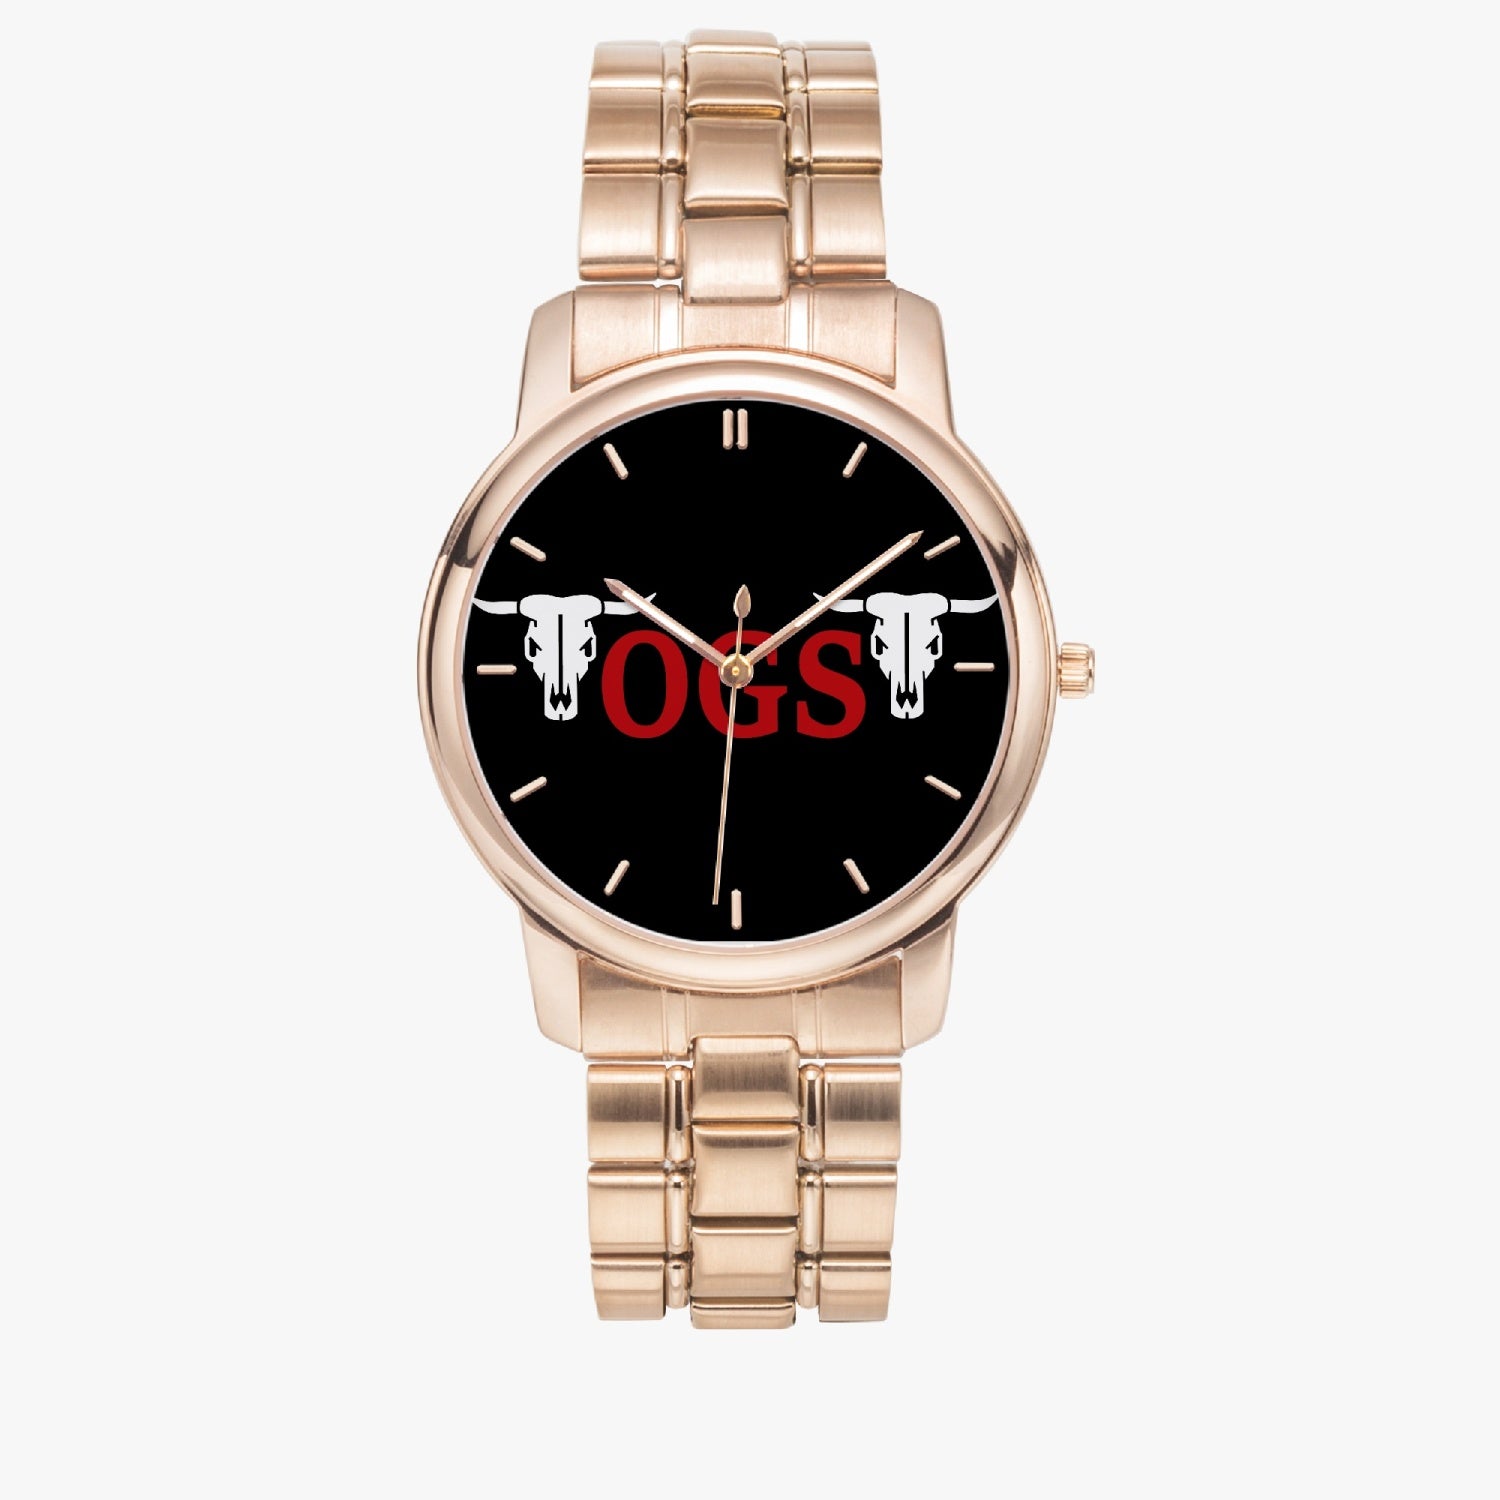 t-ogs WATCHES